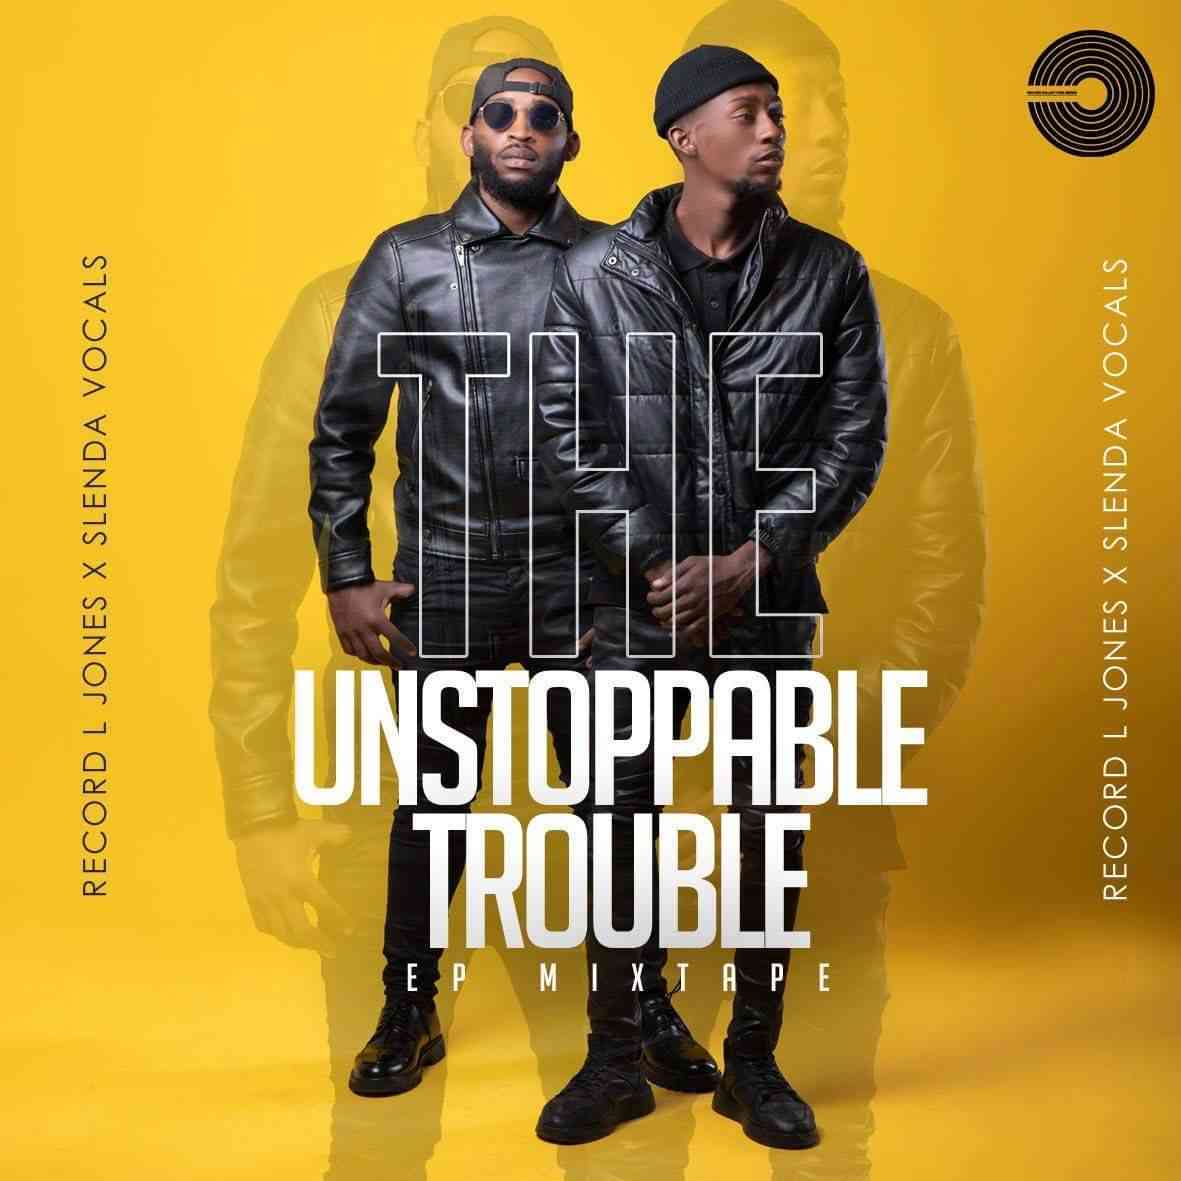 Record L Jones & Slenda Vocals The Unstoppable Trouble EP